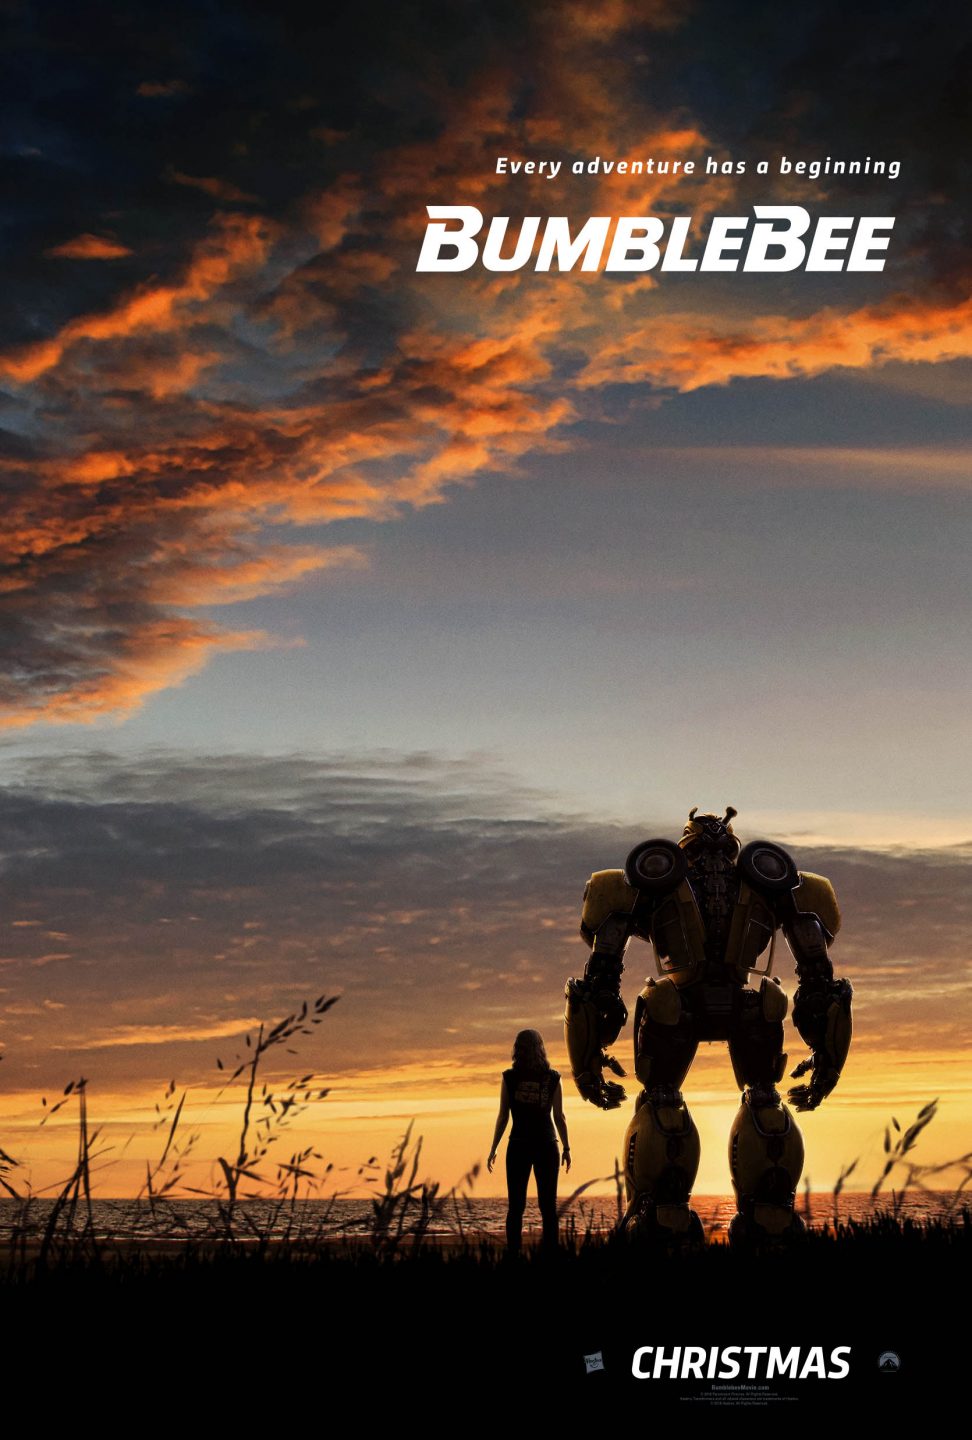 Bumblebee poster (Paramount Pictures)